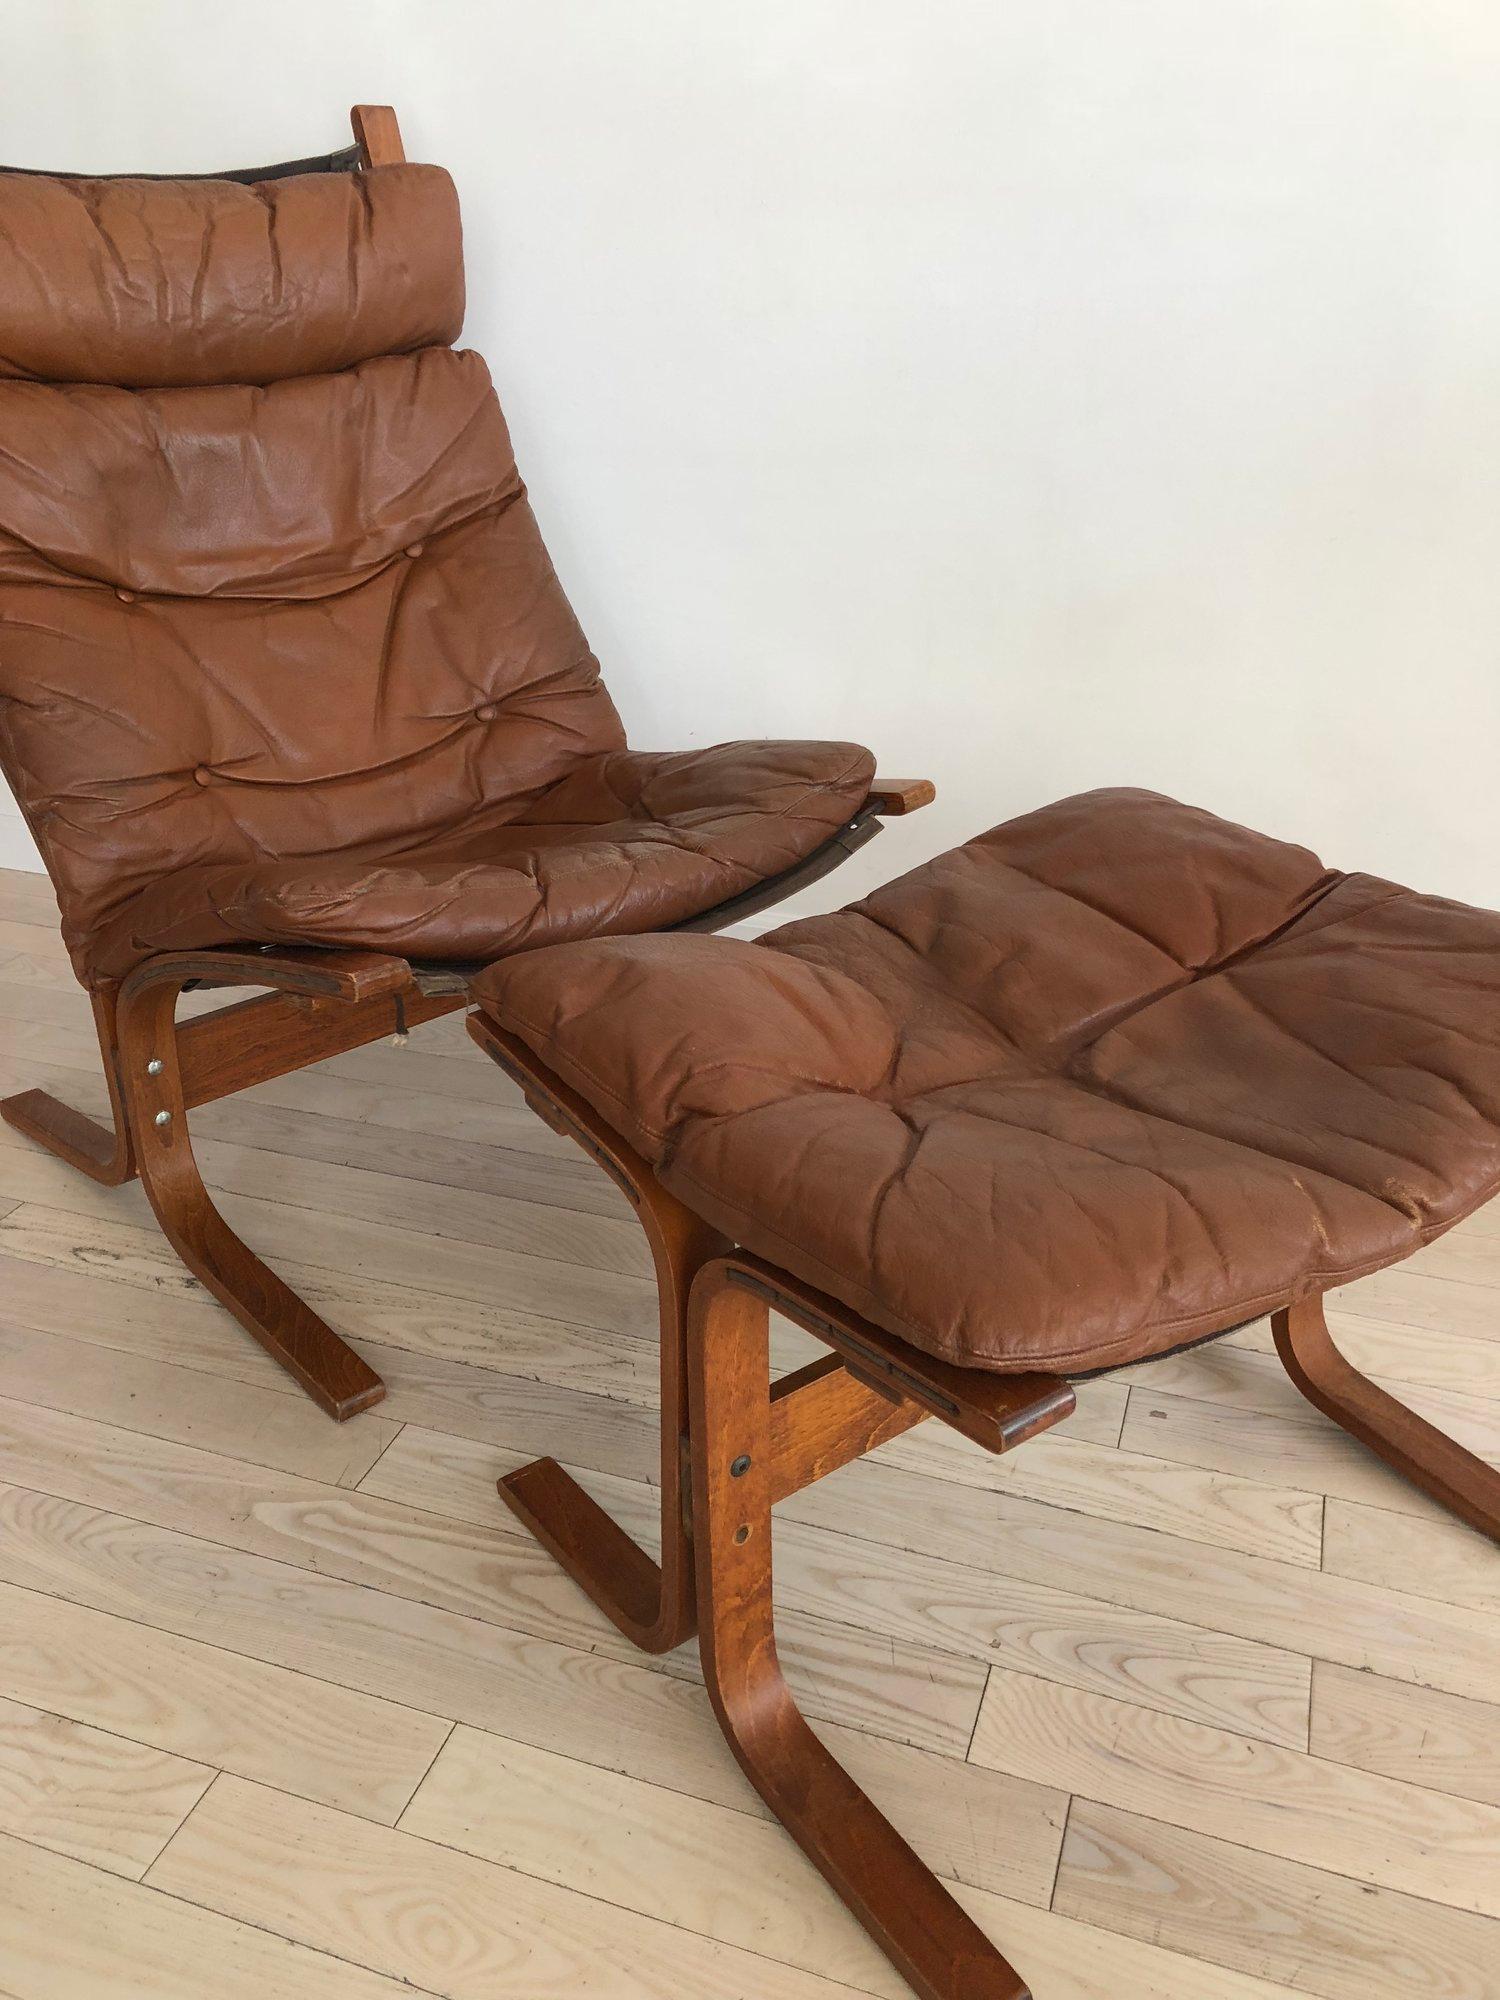 1960s Scandinavian Westnofa “Siesta” high lounge chair and ottoman. Leather detachable cushions with lisper. canvas sling. Bent wood Fram. Made in Norway by Westnofa designed by Ingmar Relling. Super cozy statement chair. 

Sold as a set chair and